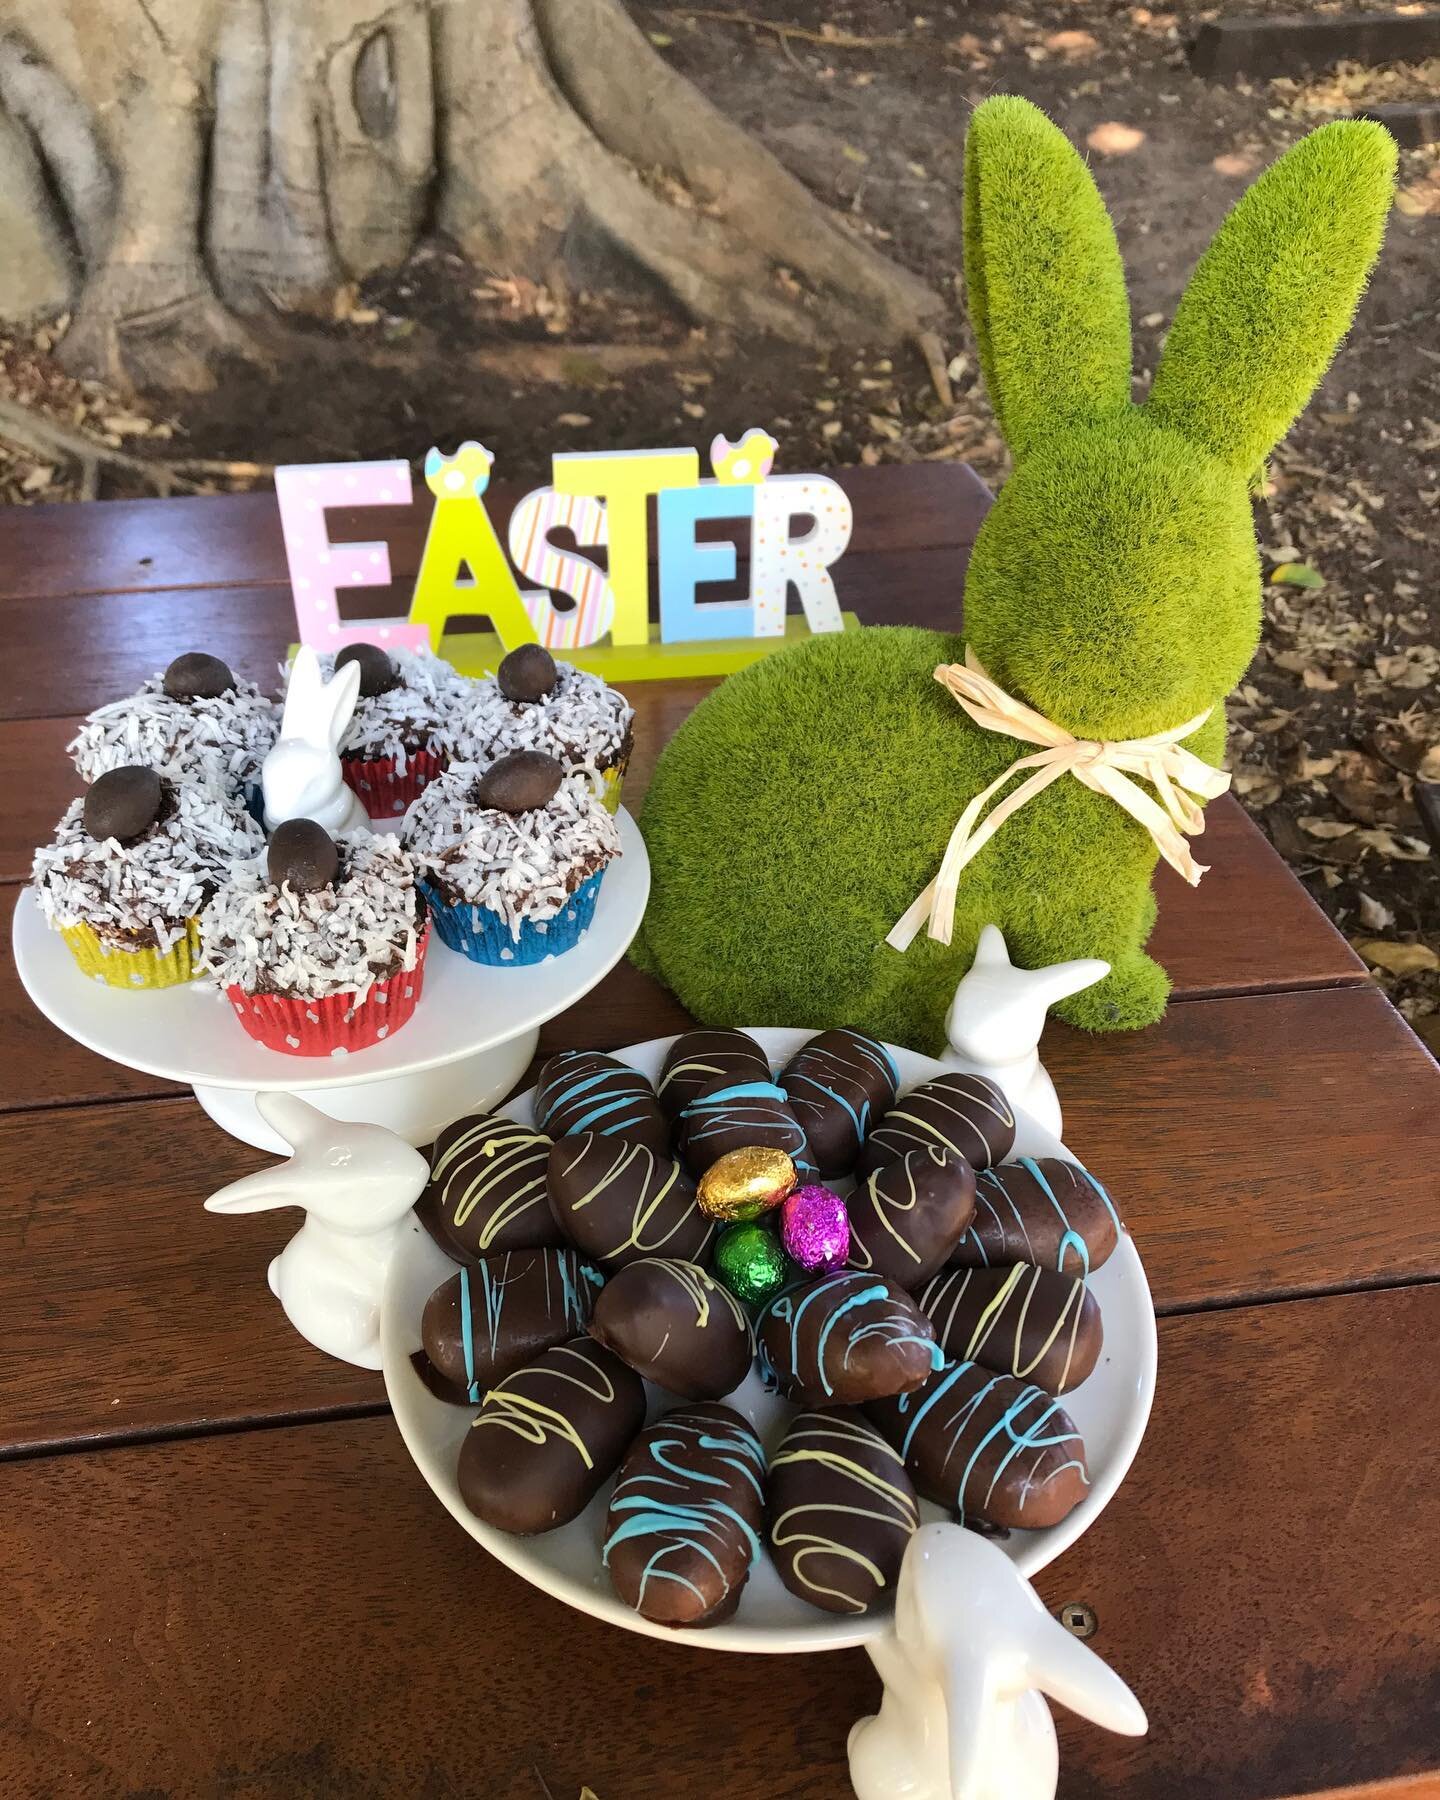 We have your easter cravings covered with our hand crafted peanut butter or coconut filled Easter eggs!
And chocolate coconut cupcakes!